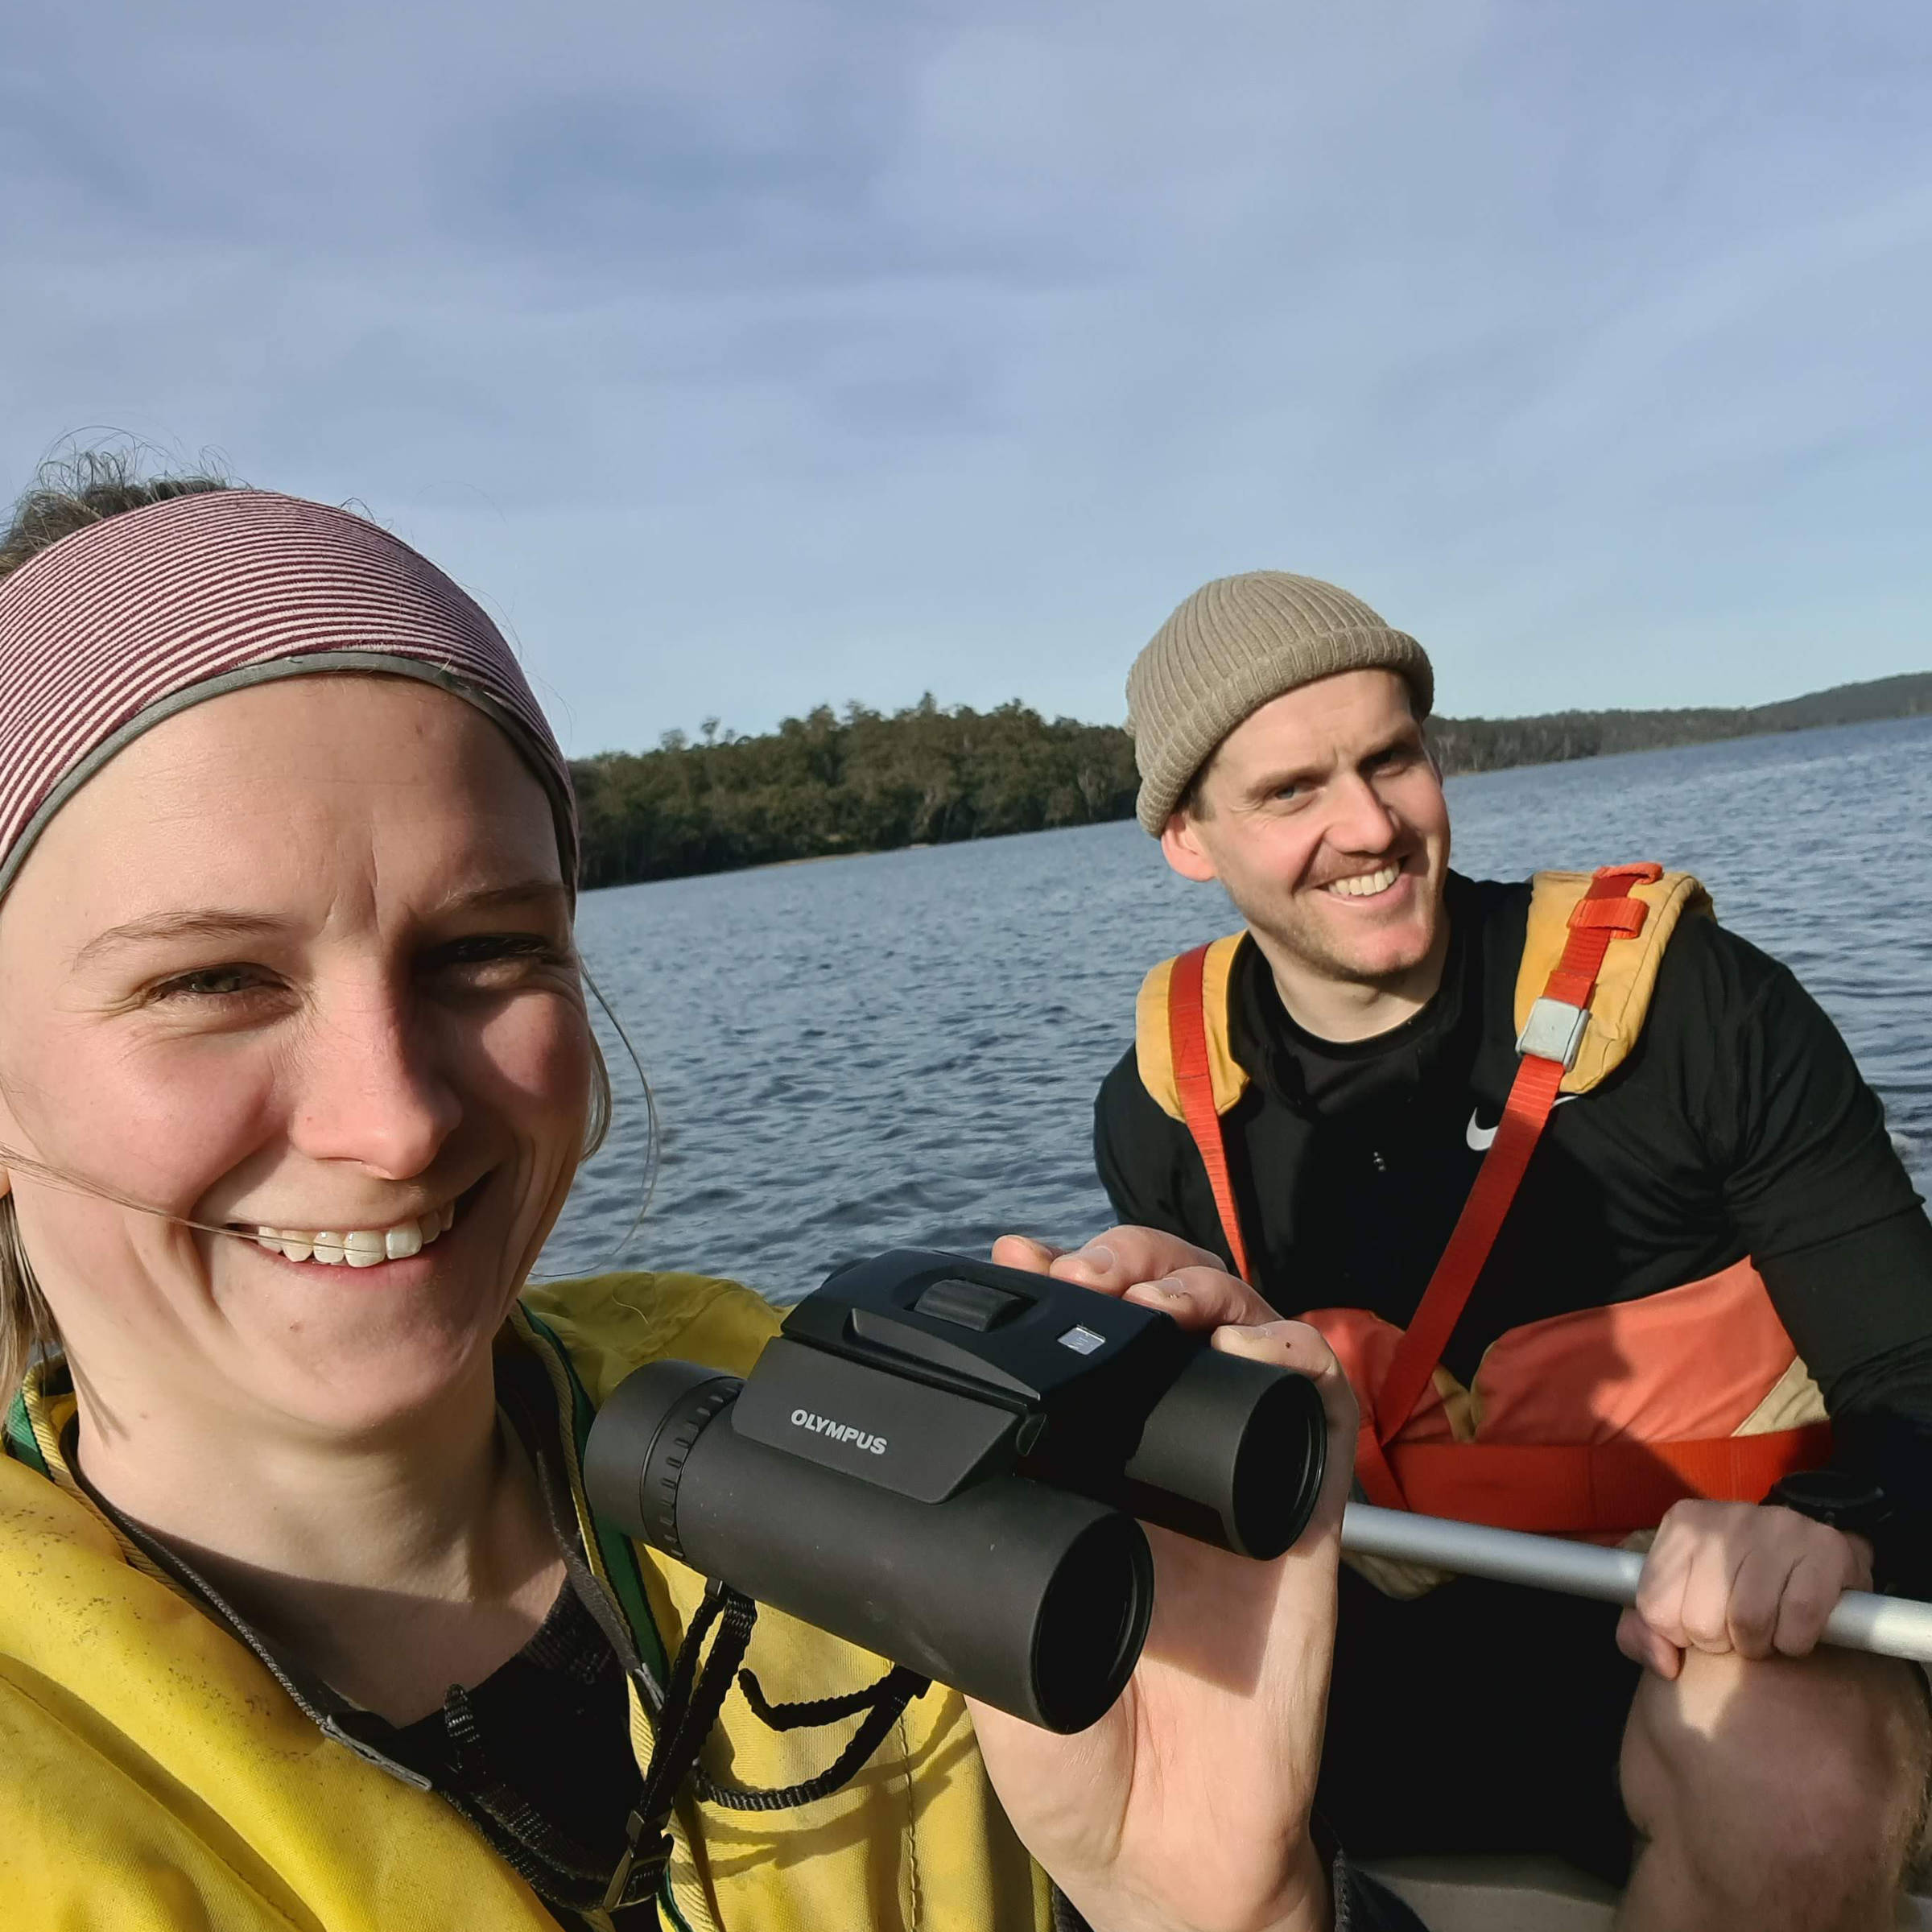 A man and woman in their twenties, wearing life jackets and sitting in a kayak on water, with land in the distance, smile at the camera. The woman is holding up a pair of binoculars. Photo: Kelsey Picard.